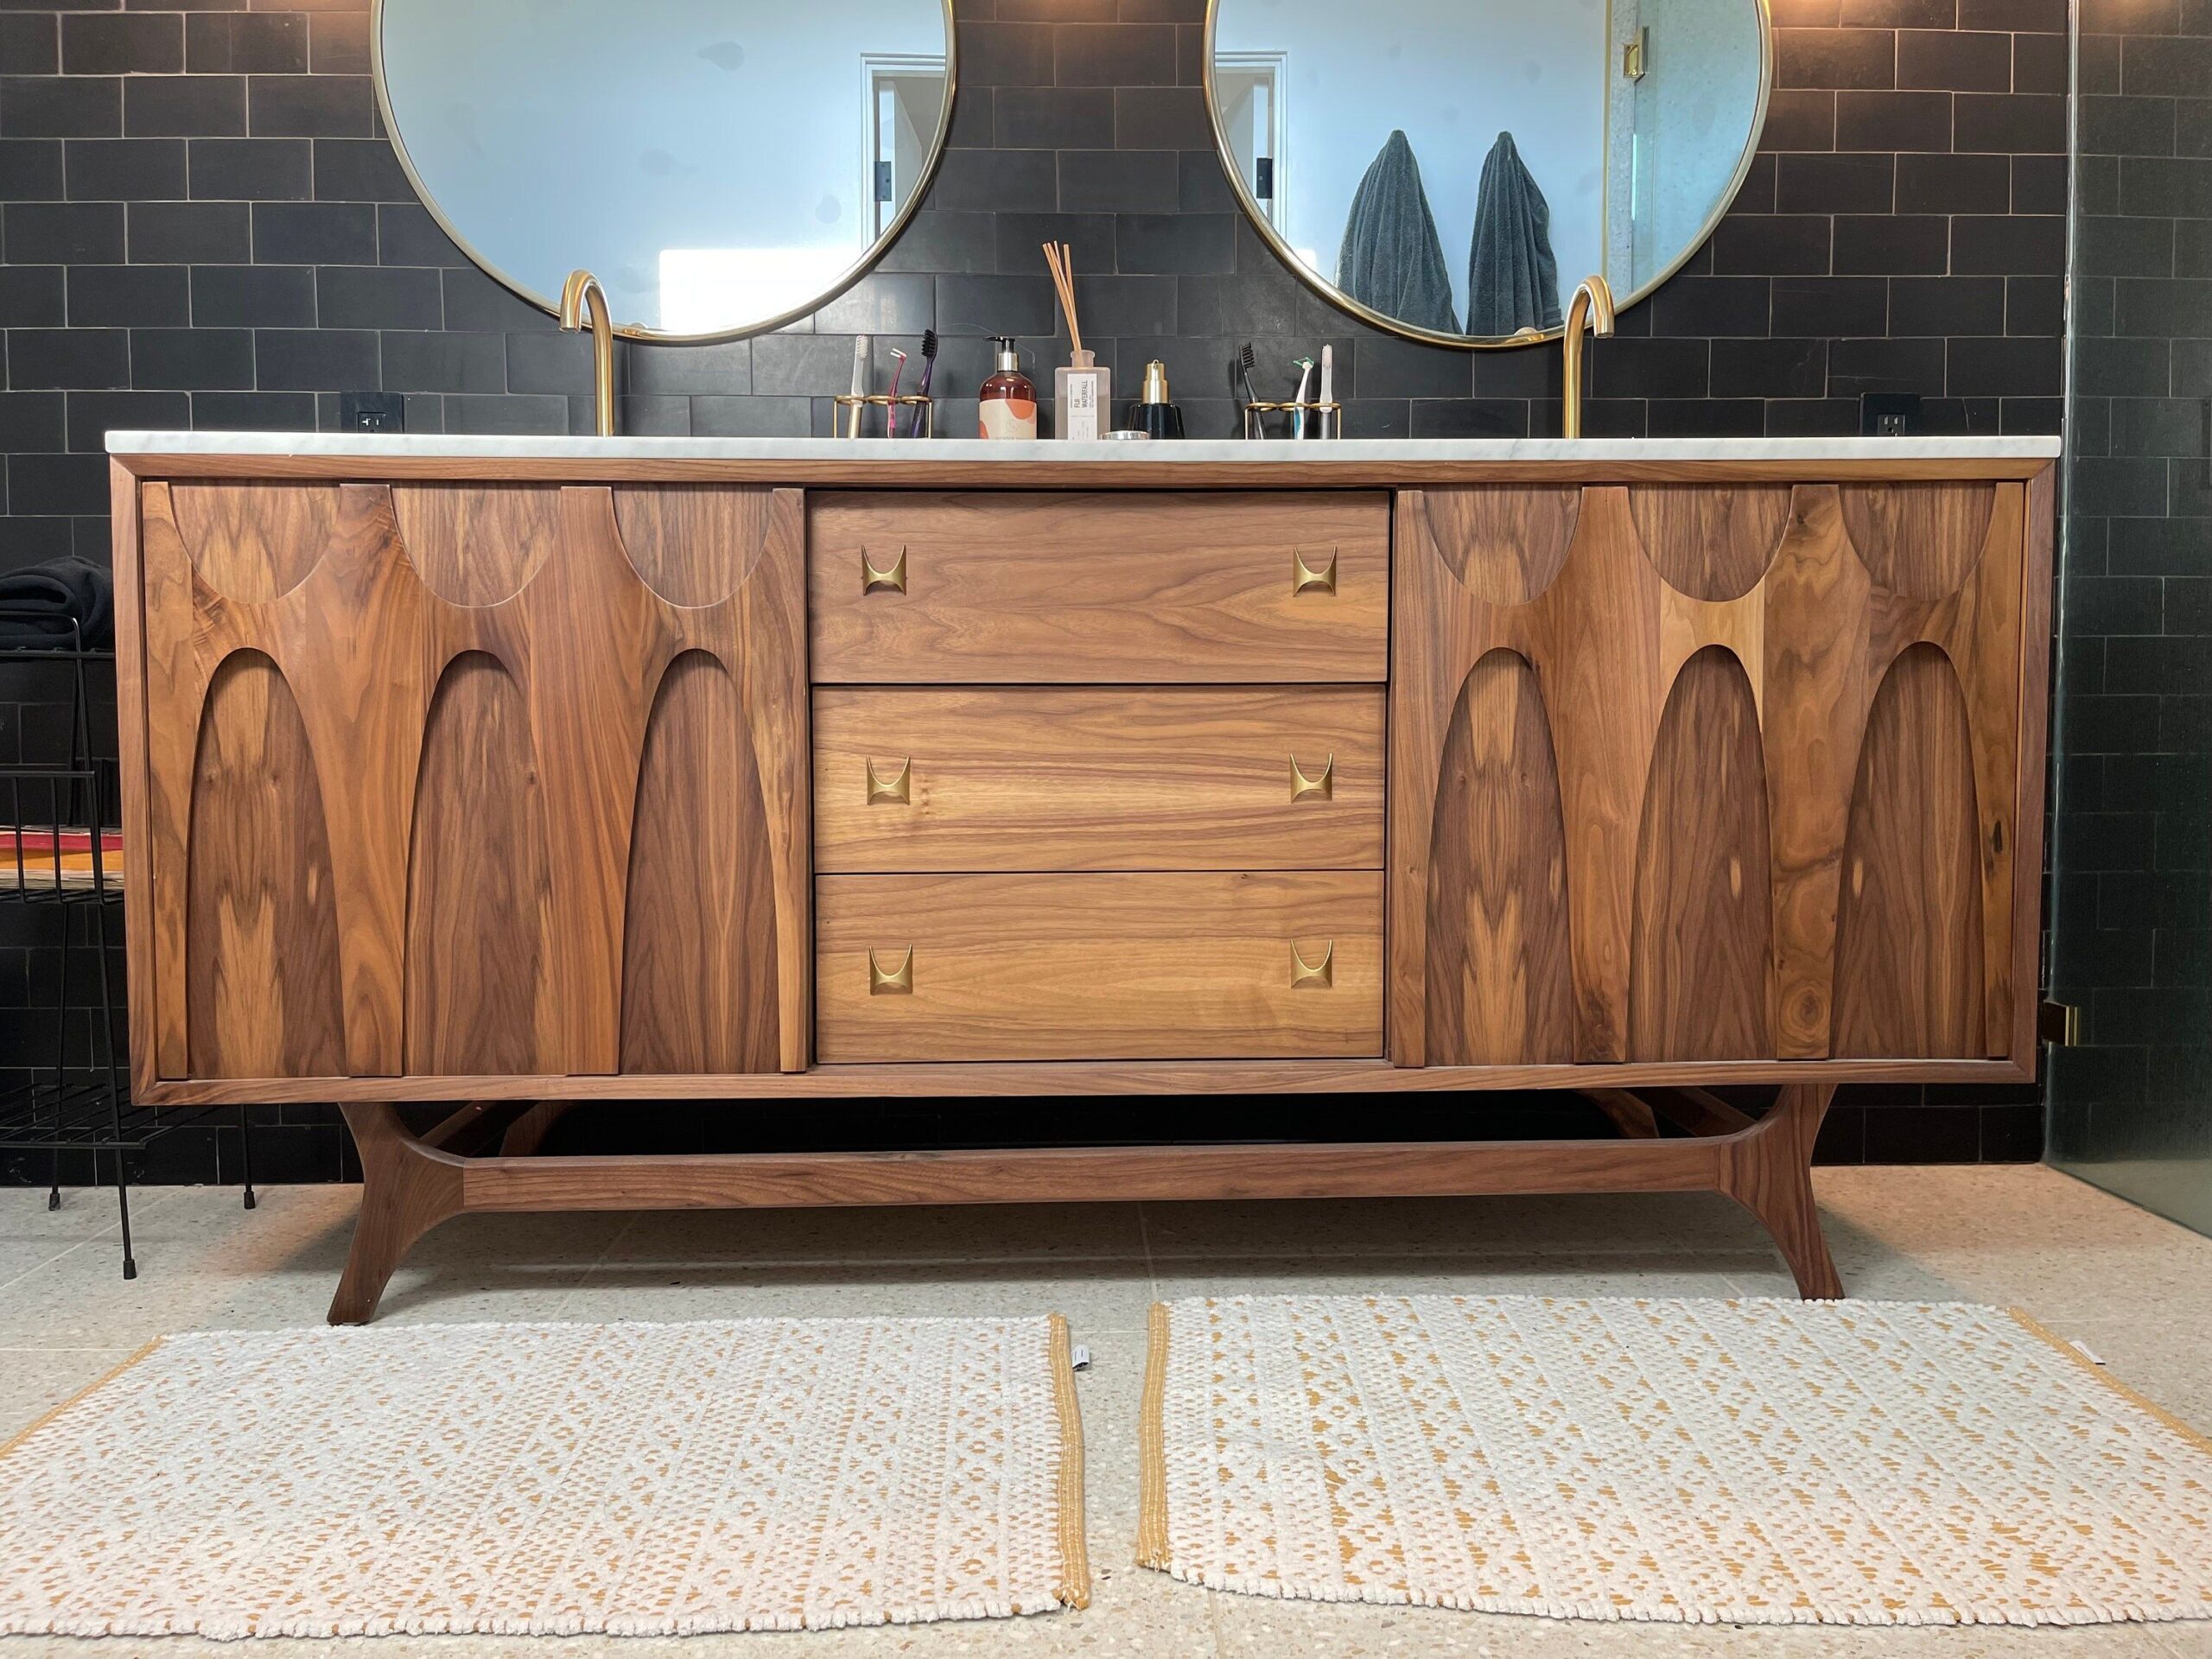 Twin Basins: Elevating Your Bathroom with a Double Sink Vanity Top